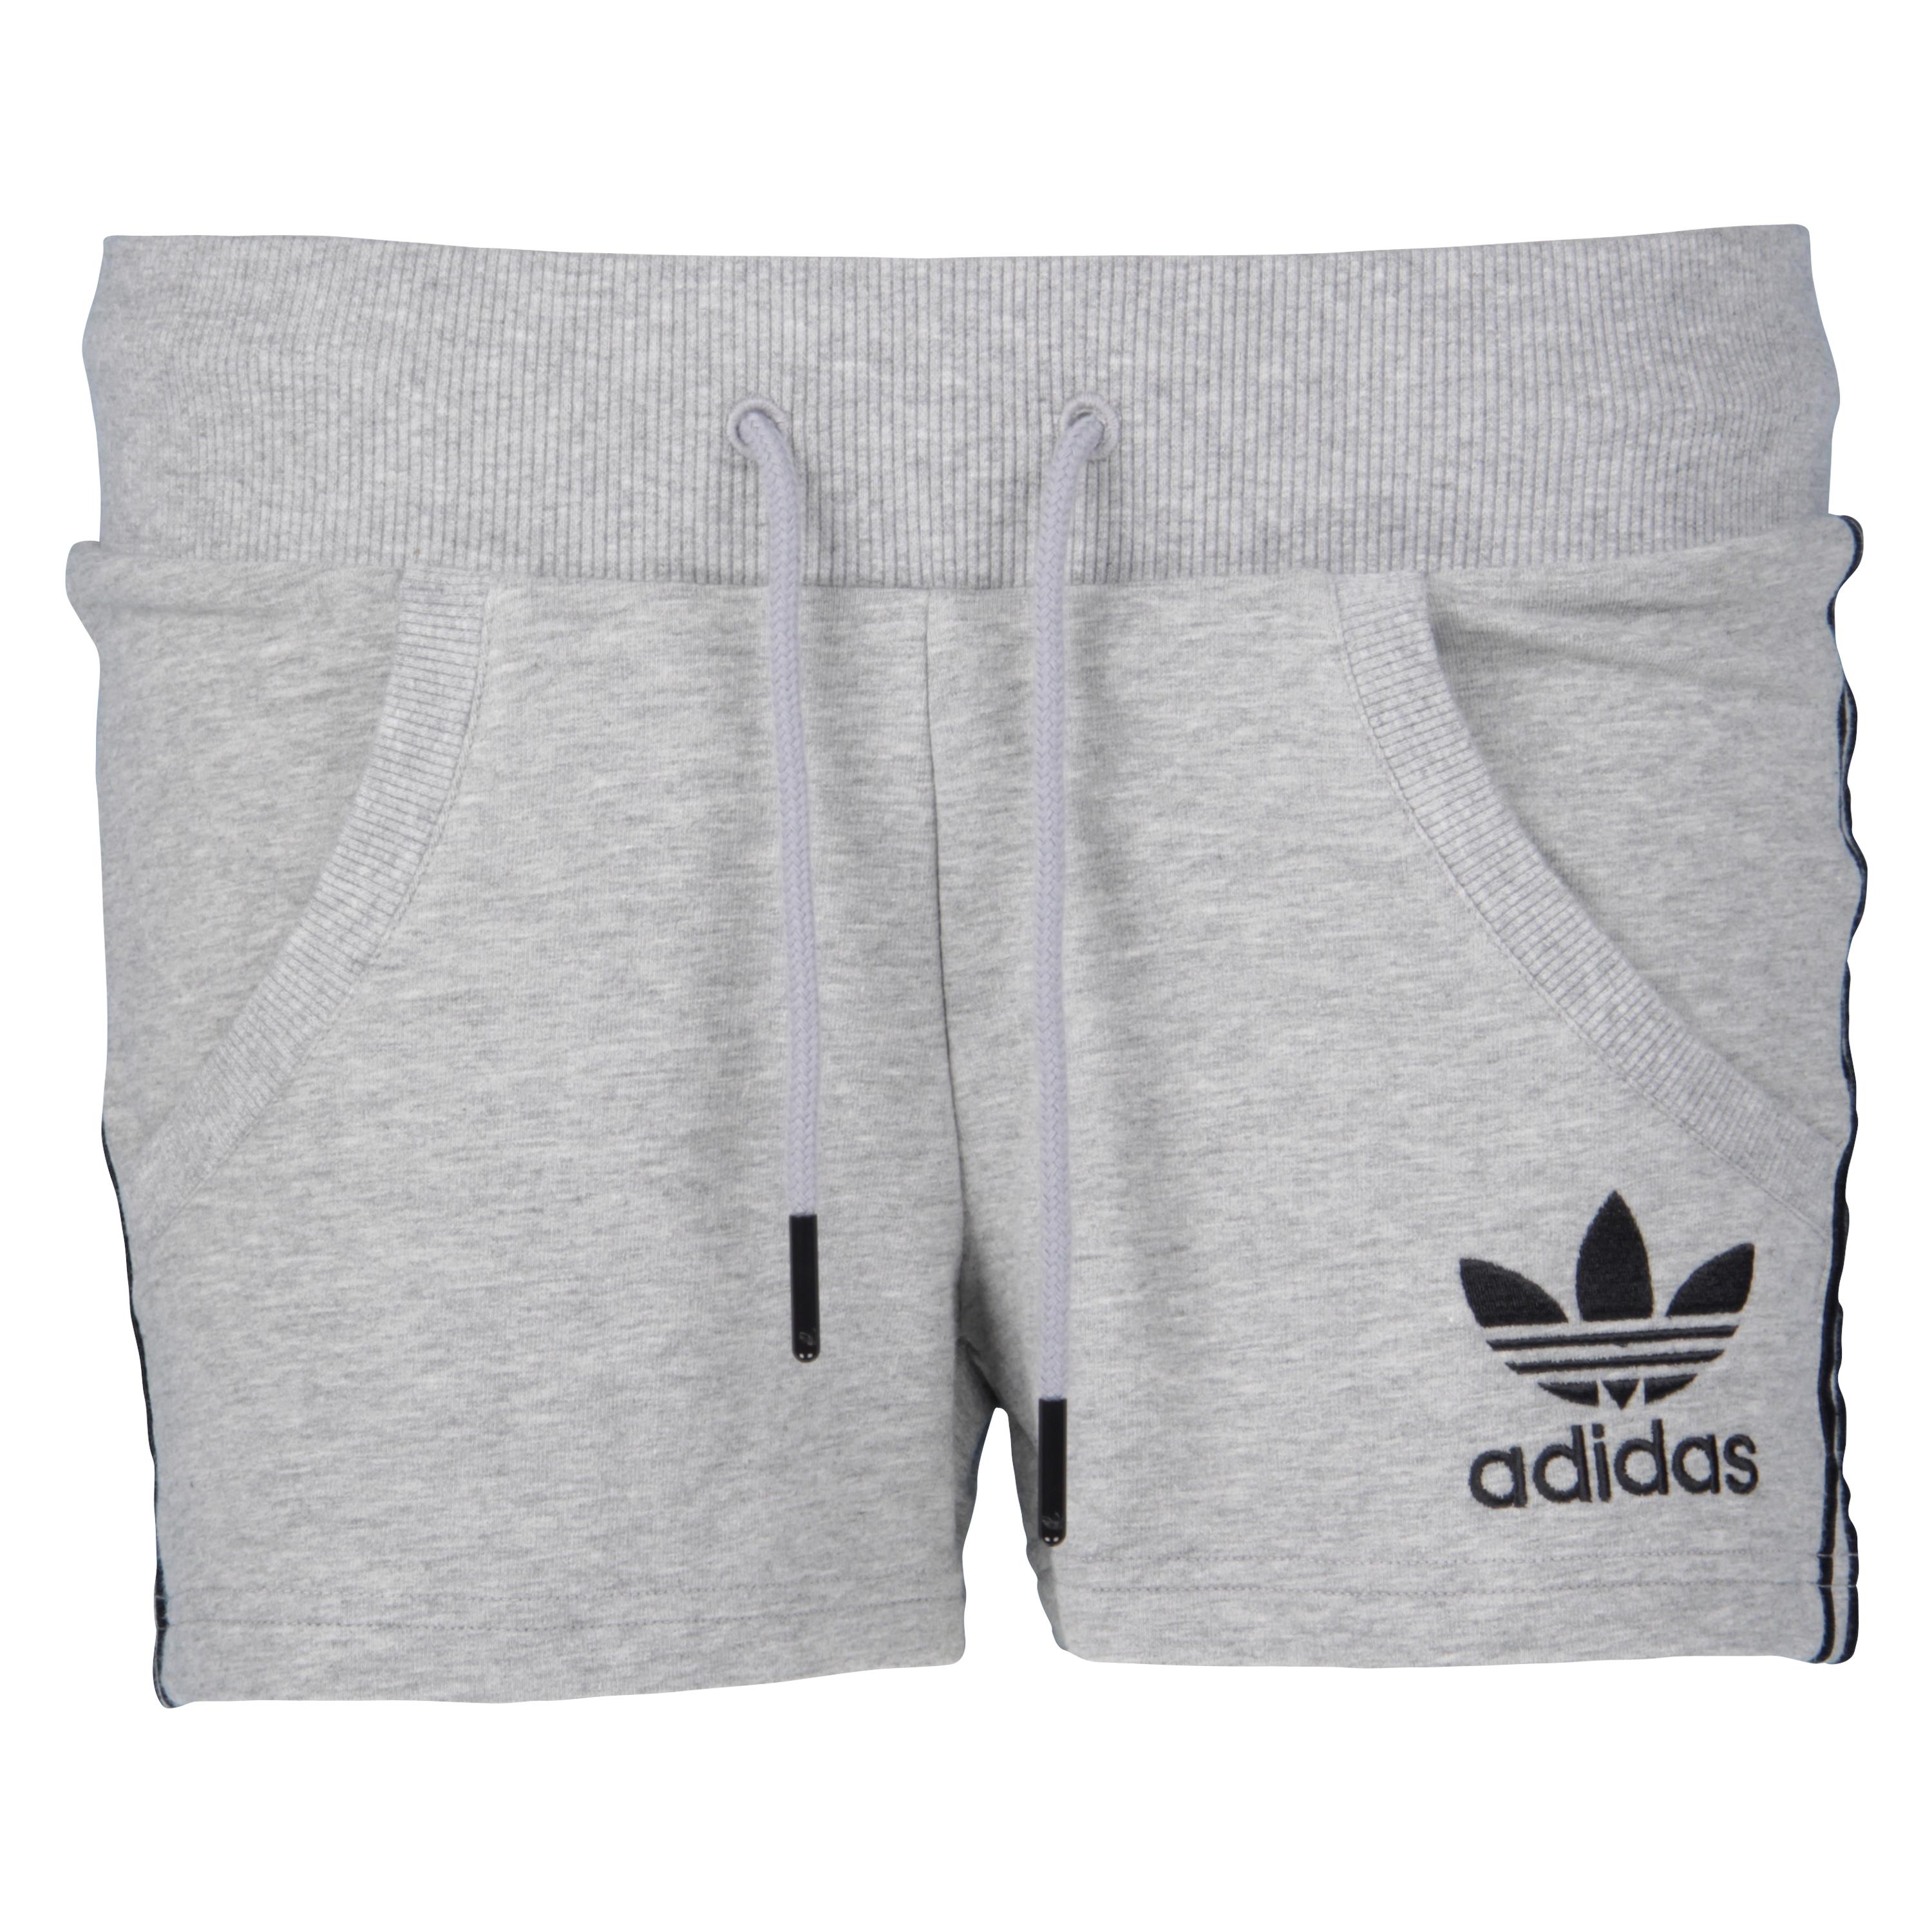 Foto adidas Chile French Terry Short Exclusiva @ Foot Locker